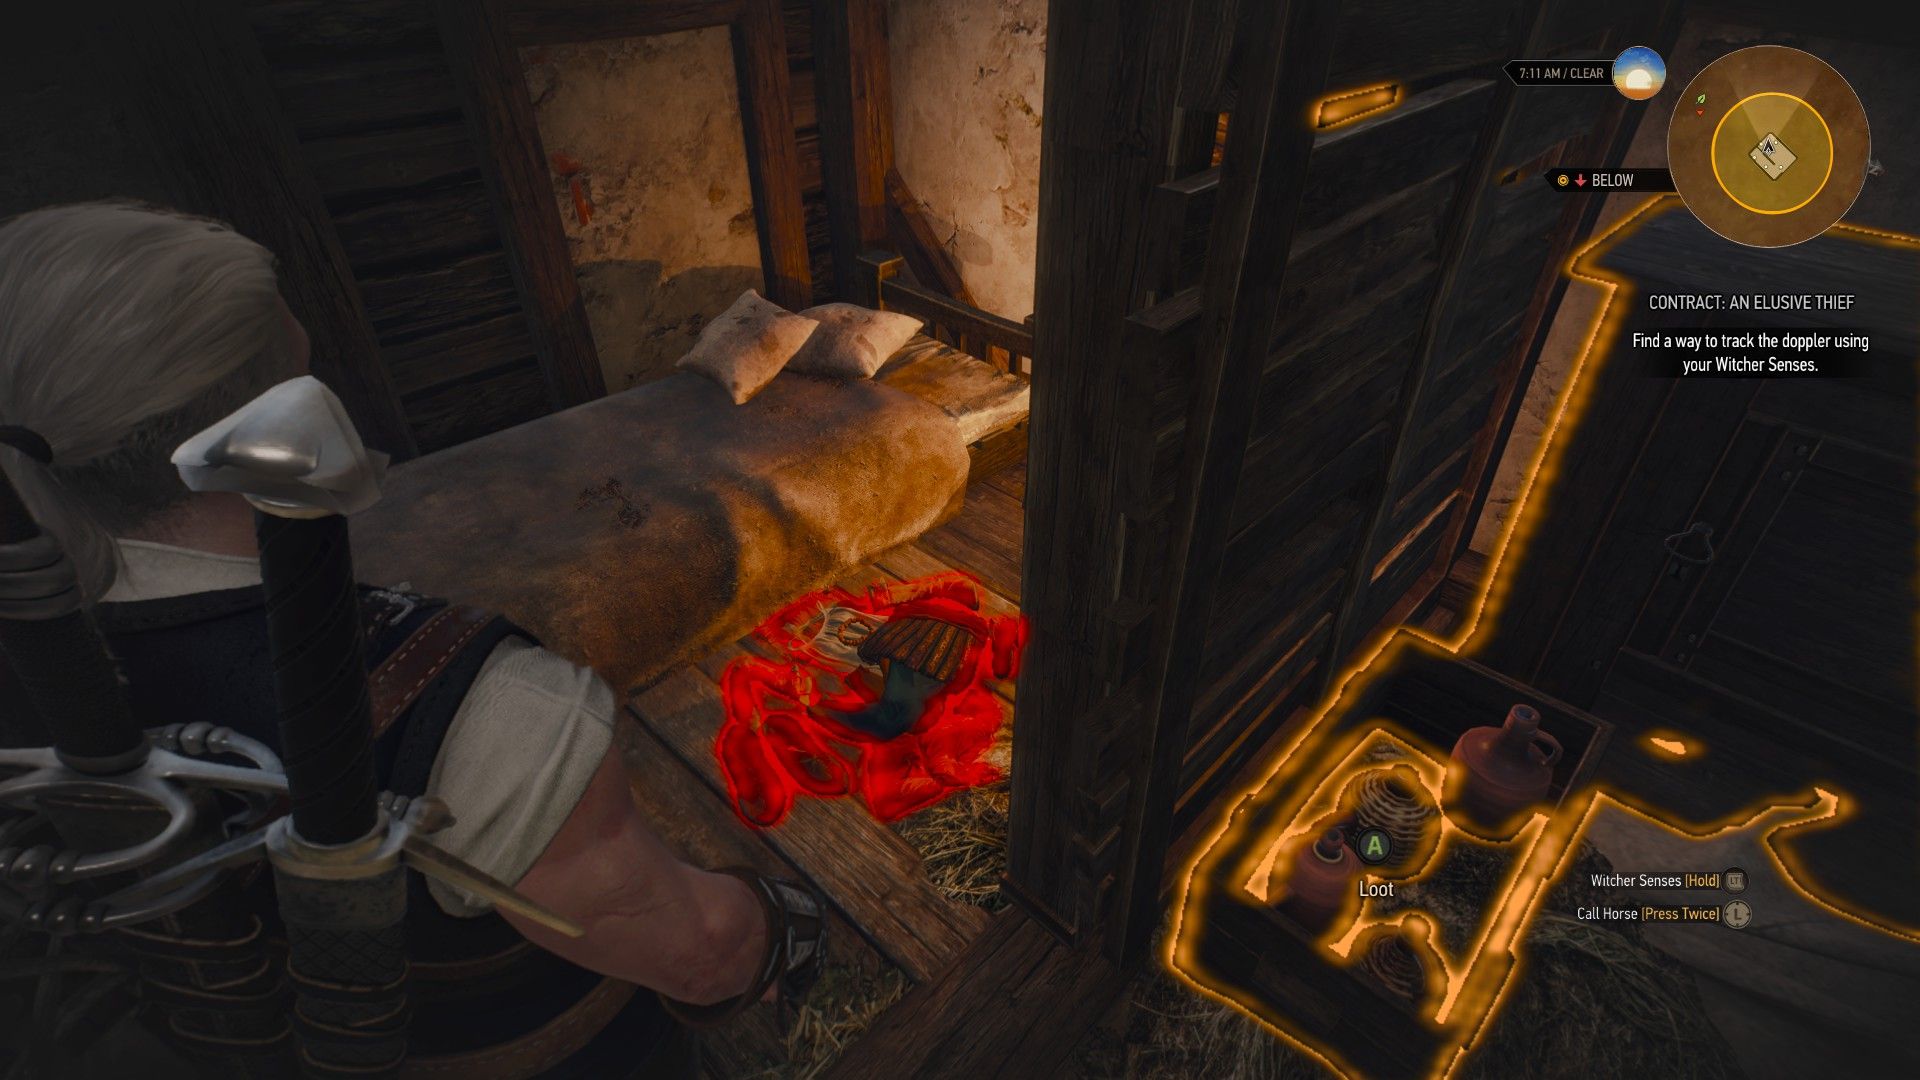 Geralt looks at a pile of clothes on the ground, highlighted by his Witcher Senses.